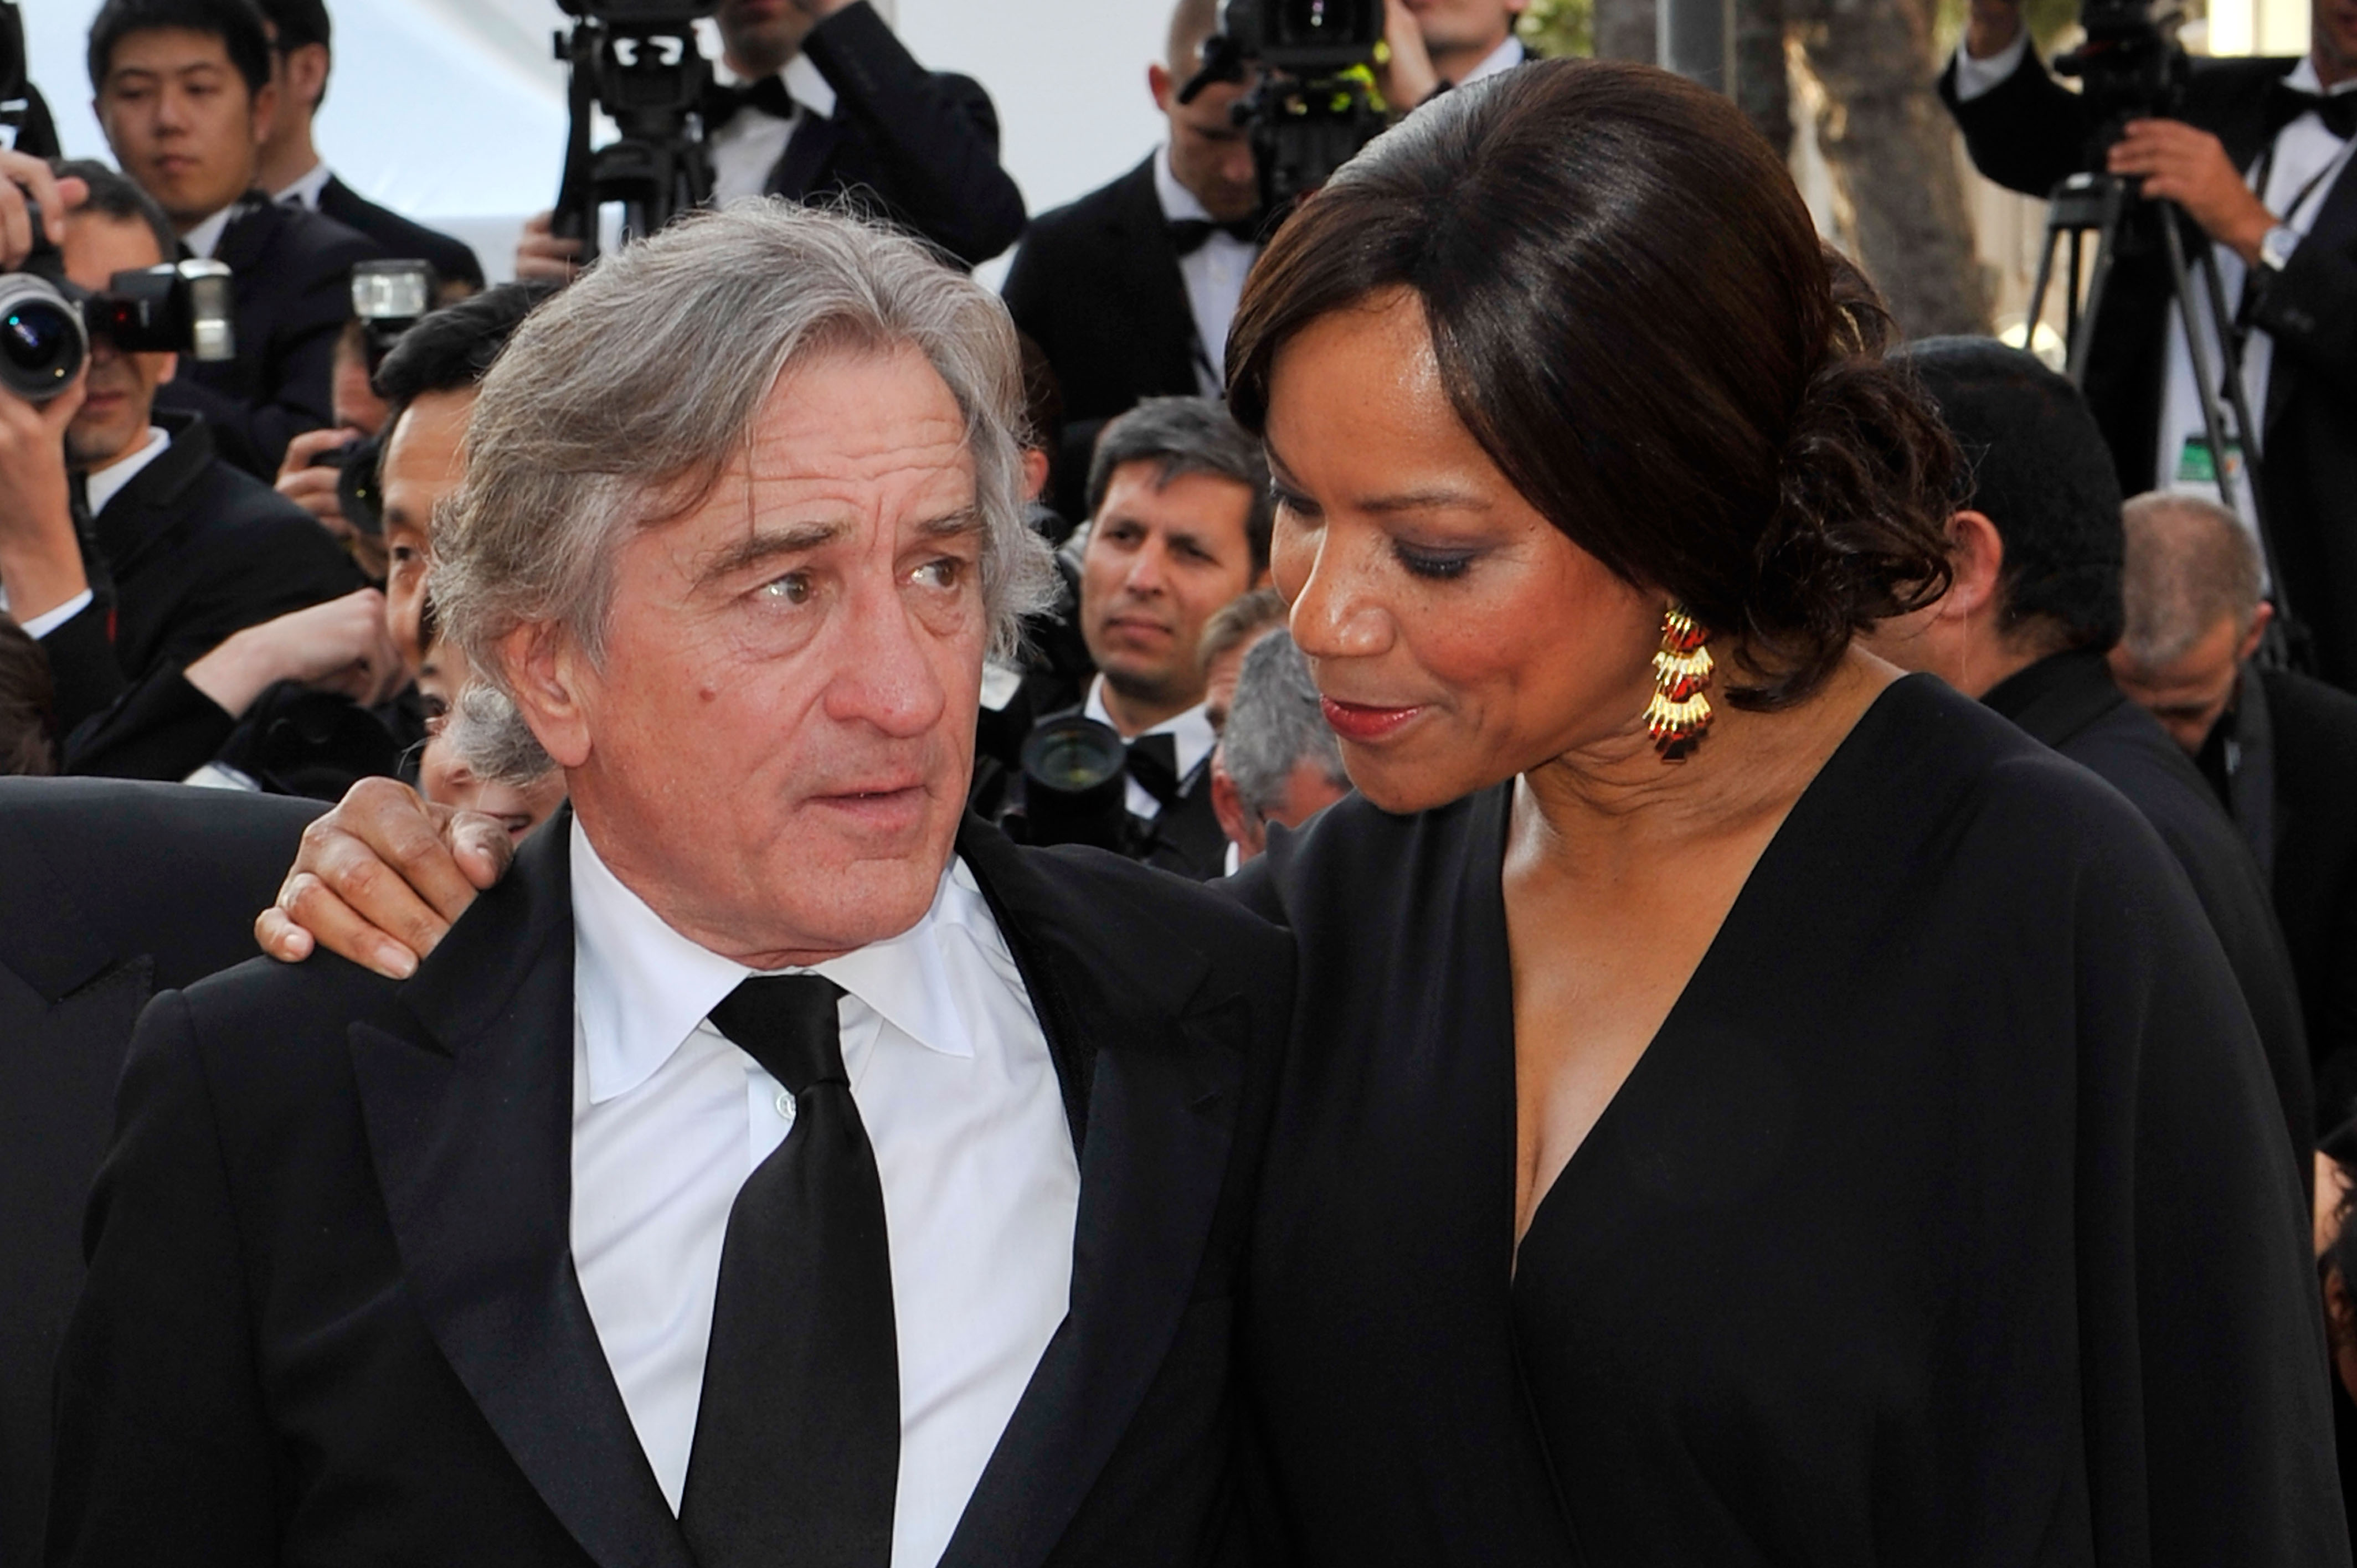 Robert De Niro and Grace Hightower in France in 2012 | Source: Getty Images